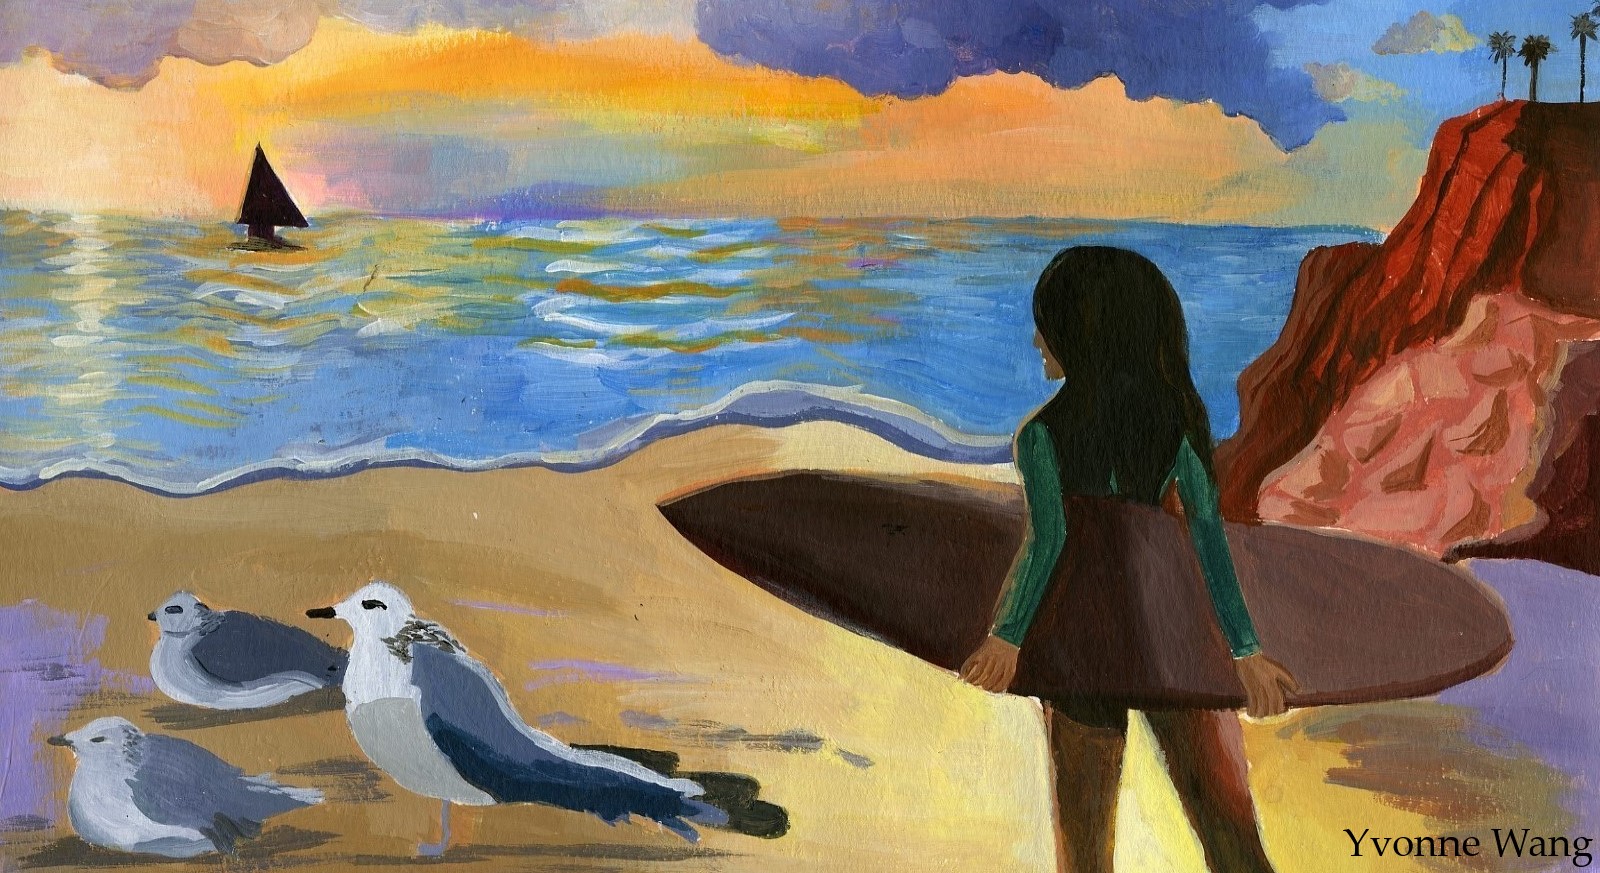 painting by YvonneWang of a girl with surfboard on a beach